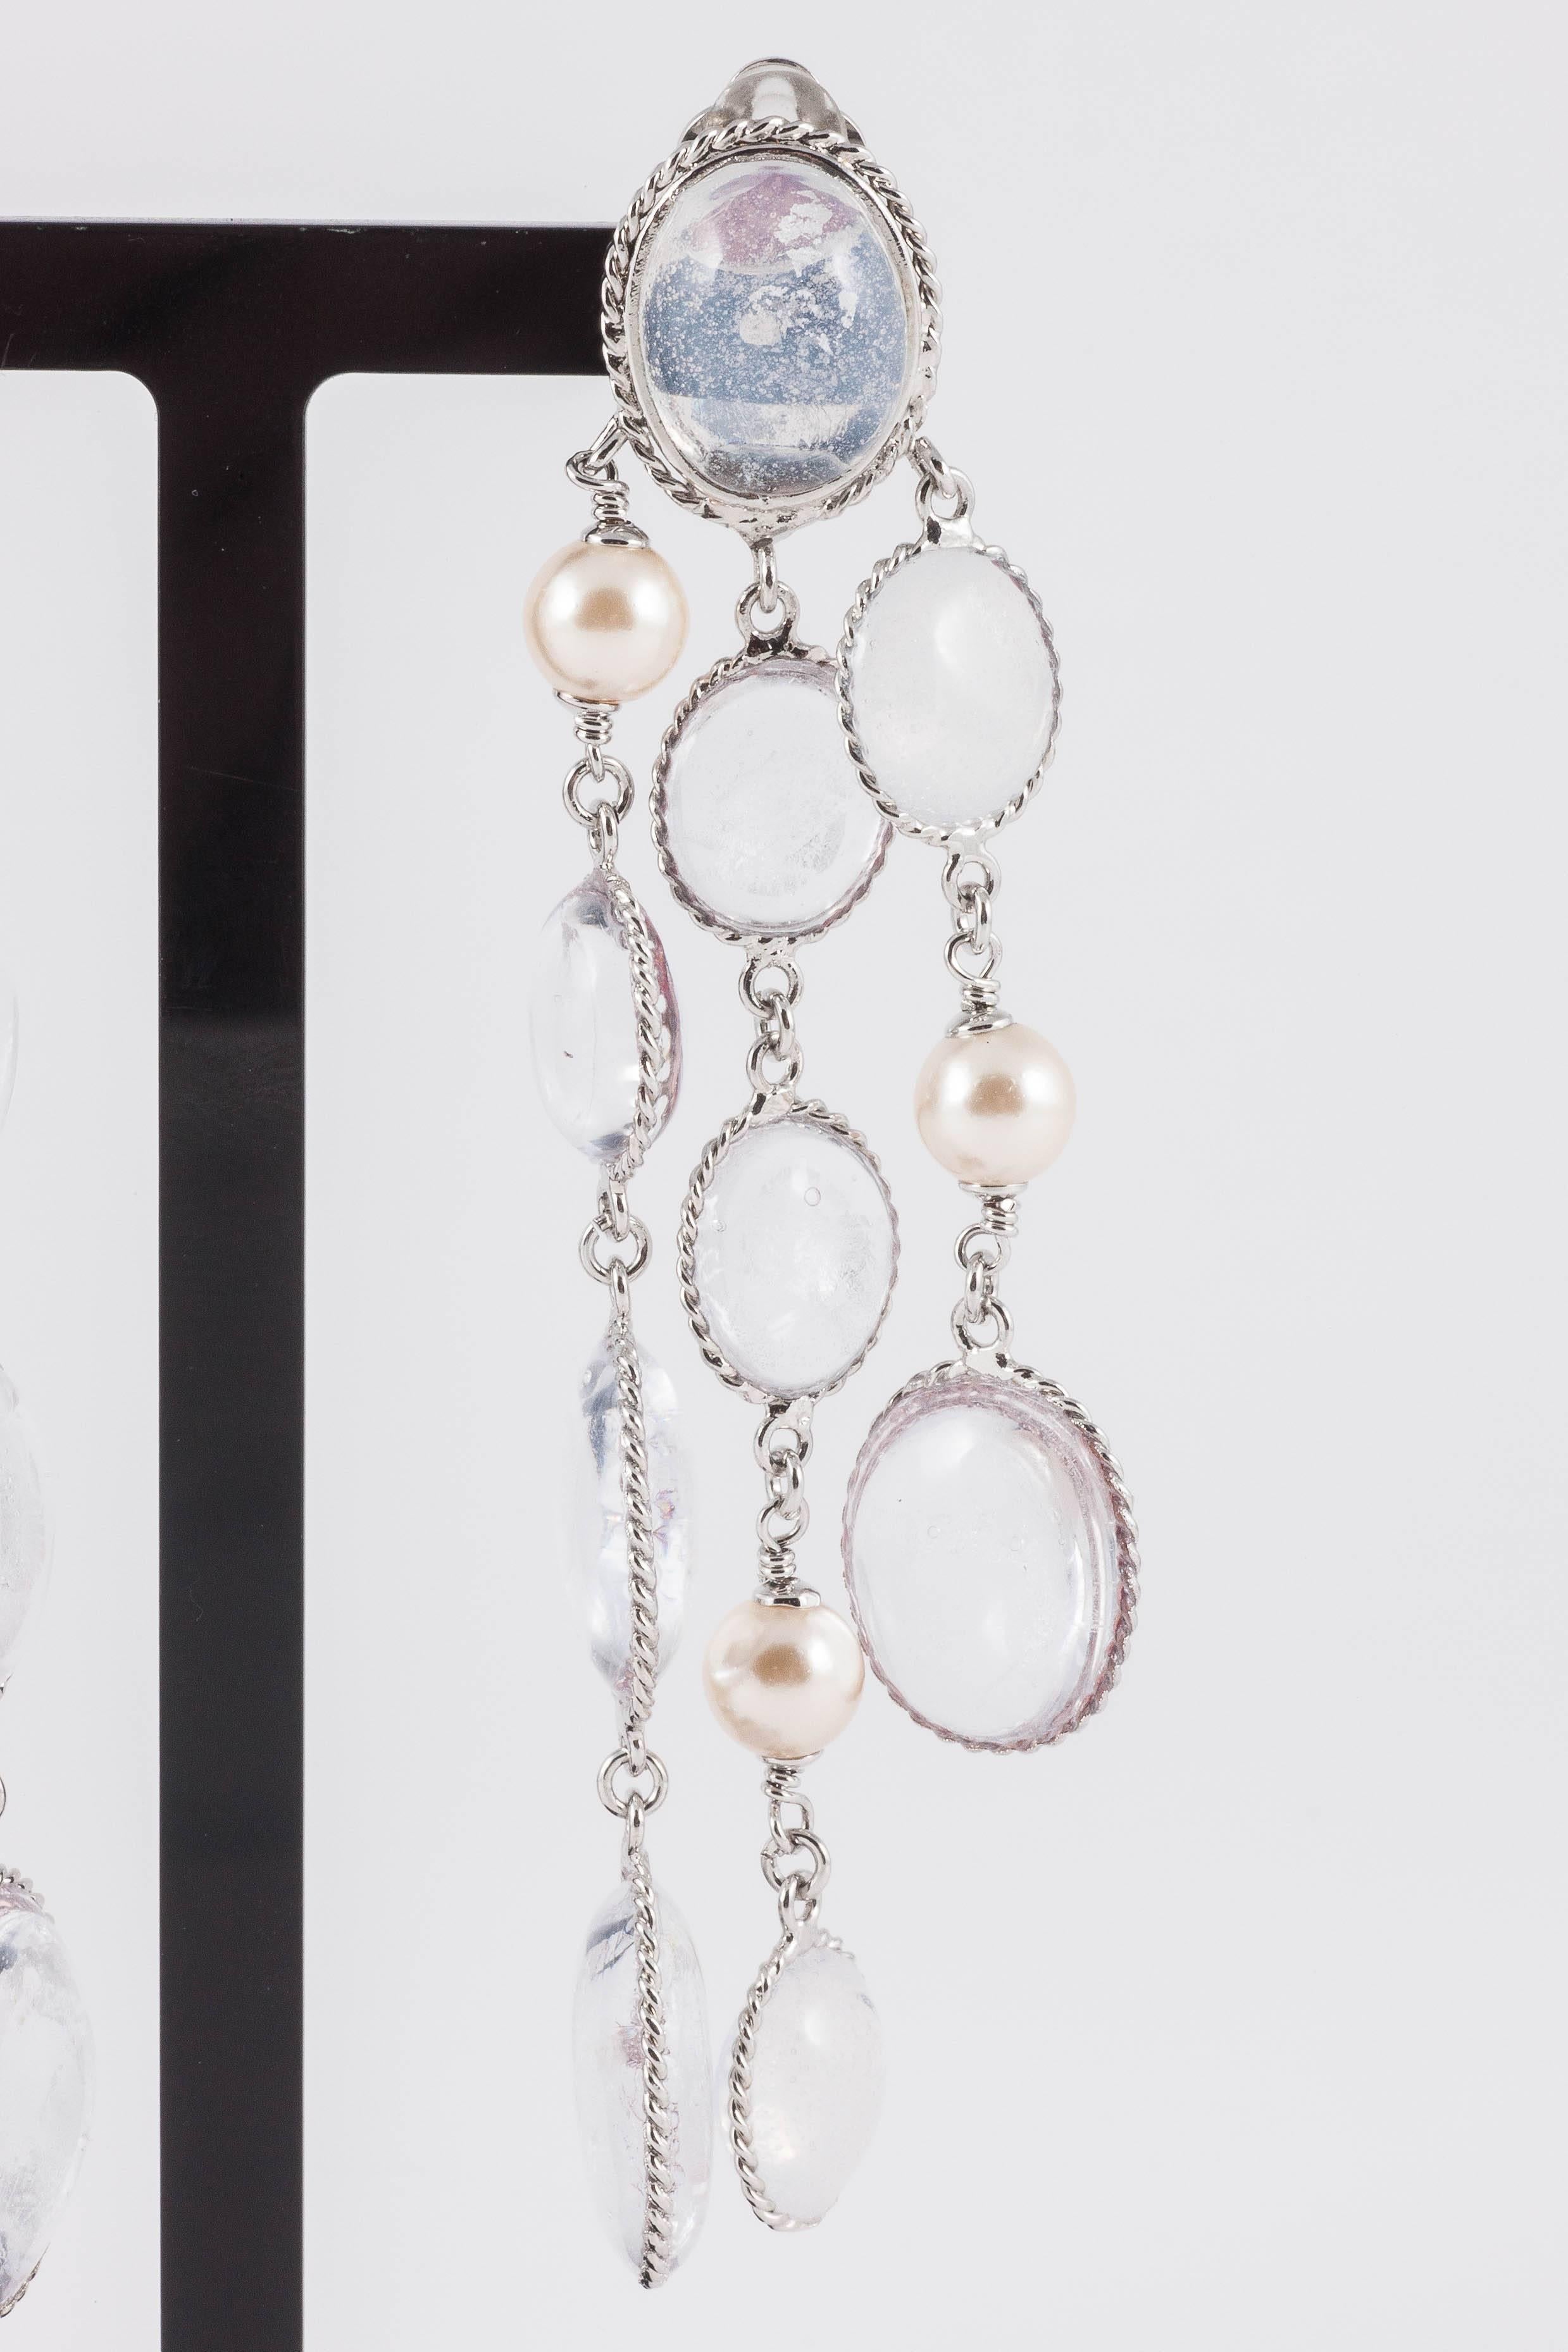 Chic and elegant articulated signed drop earrings, in three staggered rows  of silver leaf, set in clear poured glass,mixed with pearls, from the WW collection, a contemporary limited edition, hand made in Paris'. Part of the new Winter collection,